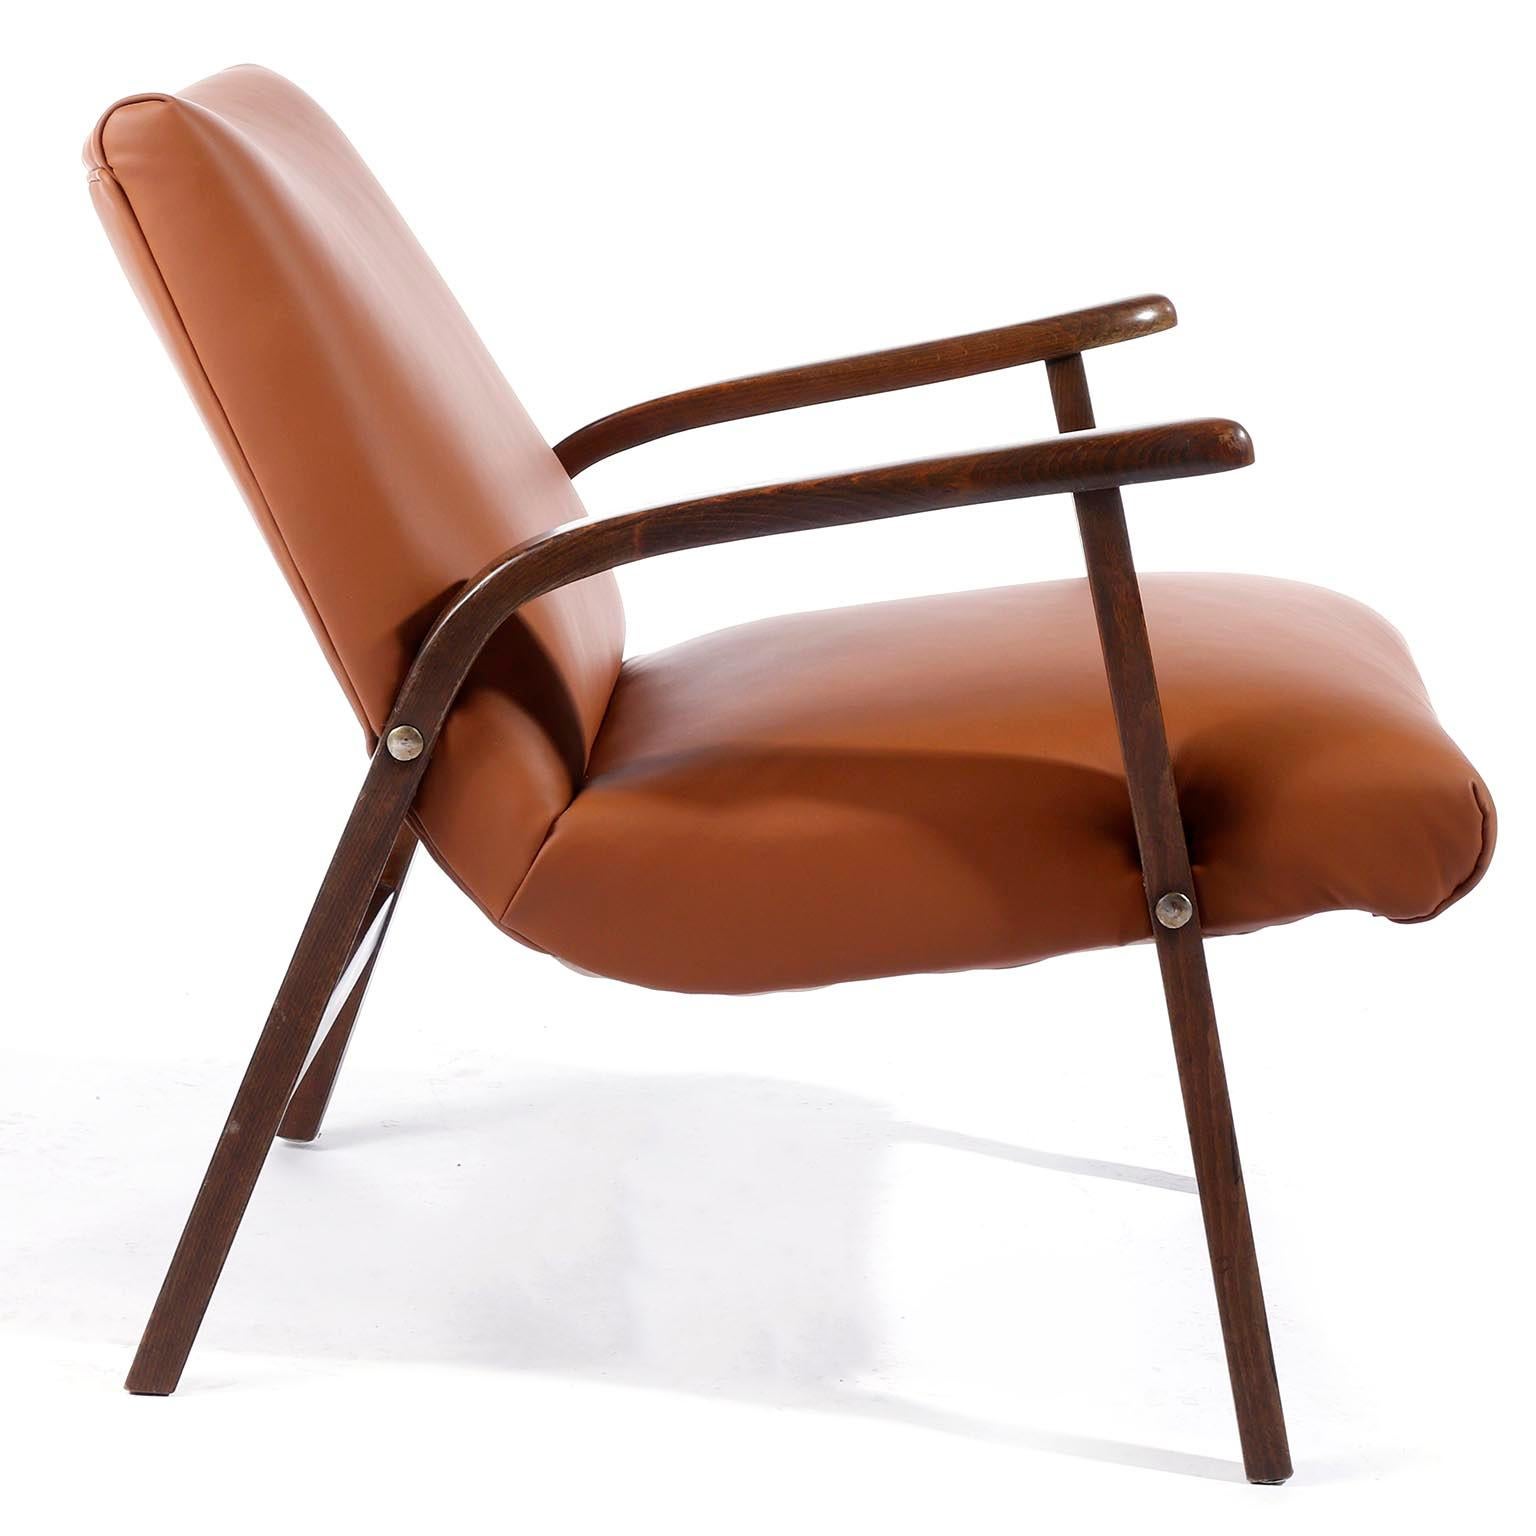 Stained Pair of Roland Rainer Chairs Armchairs Cafe Ritter Cognac Leather Austria, 1950s For Sale